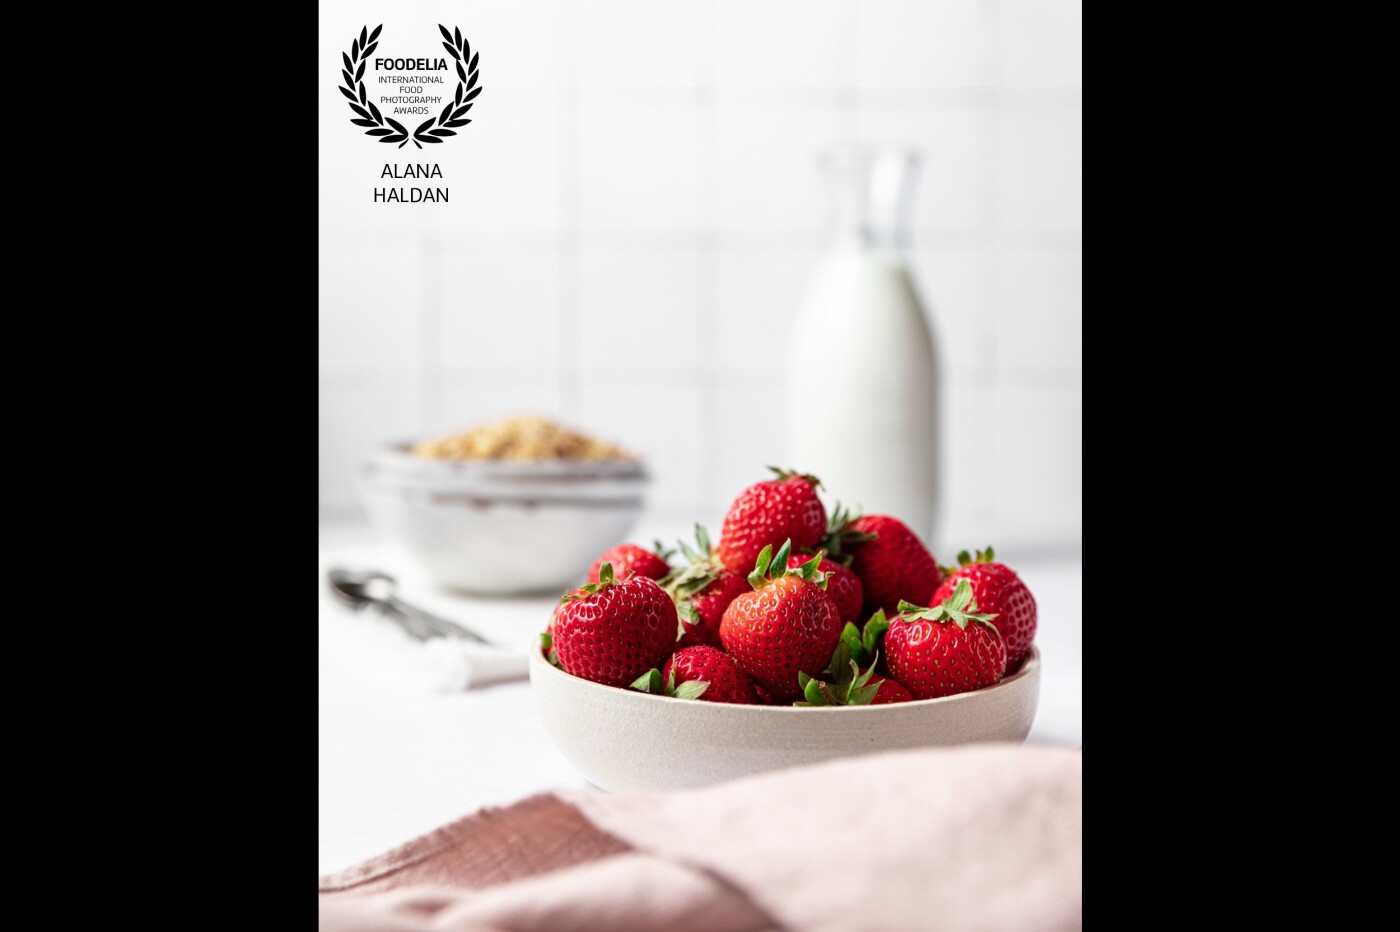 I shot this image for a strawberry-themed collaboration on Instagram. My goal was to create a light and airy look that would bring the focus to the bowl of strawberries and make the viewer feel like they getting a glimpse of my kitchen on a bright summer morning.